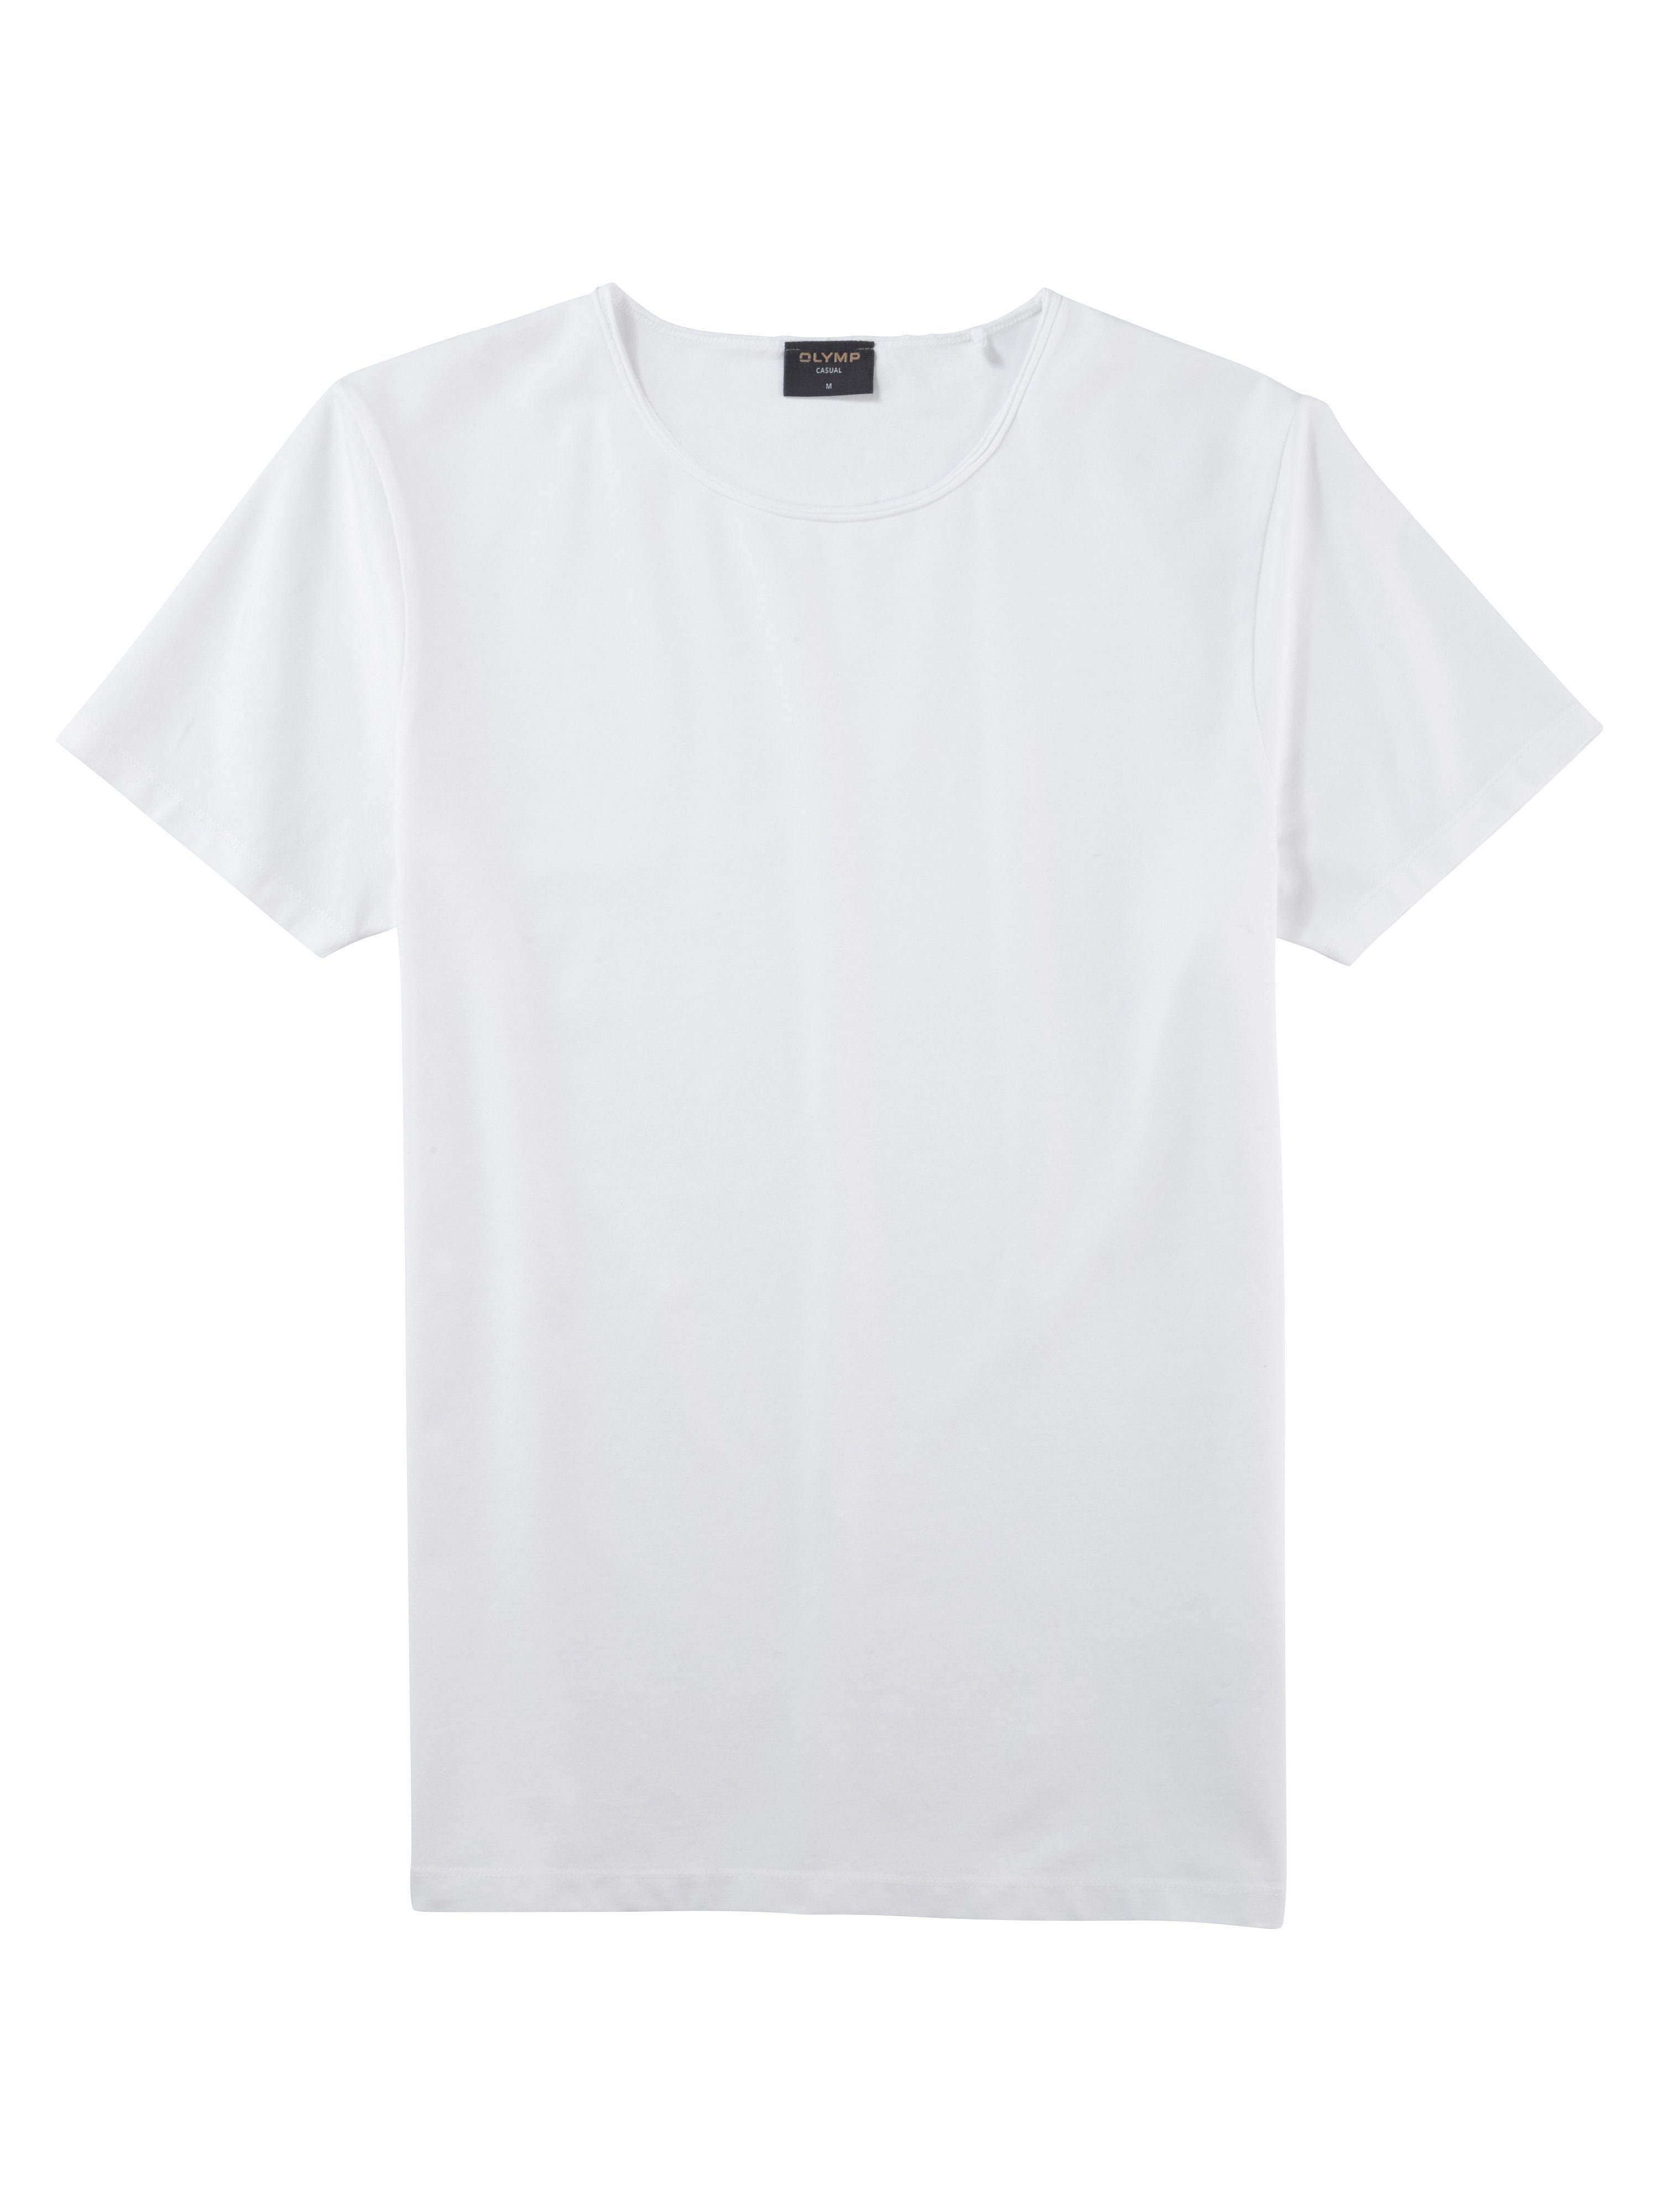 OLYMP T-Shirt Casual weiss